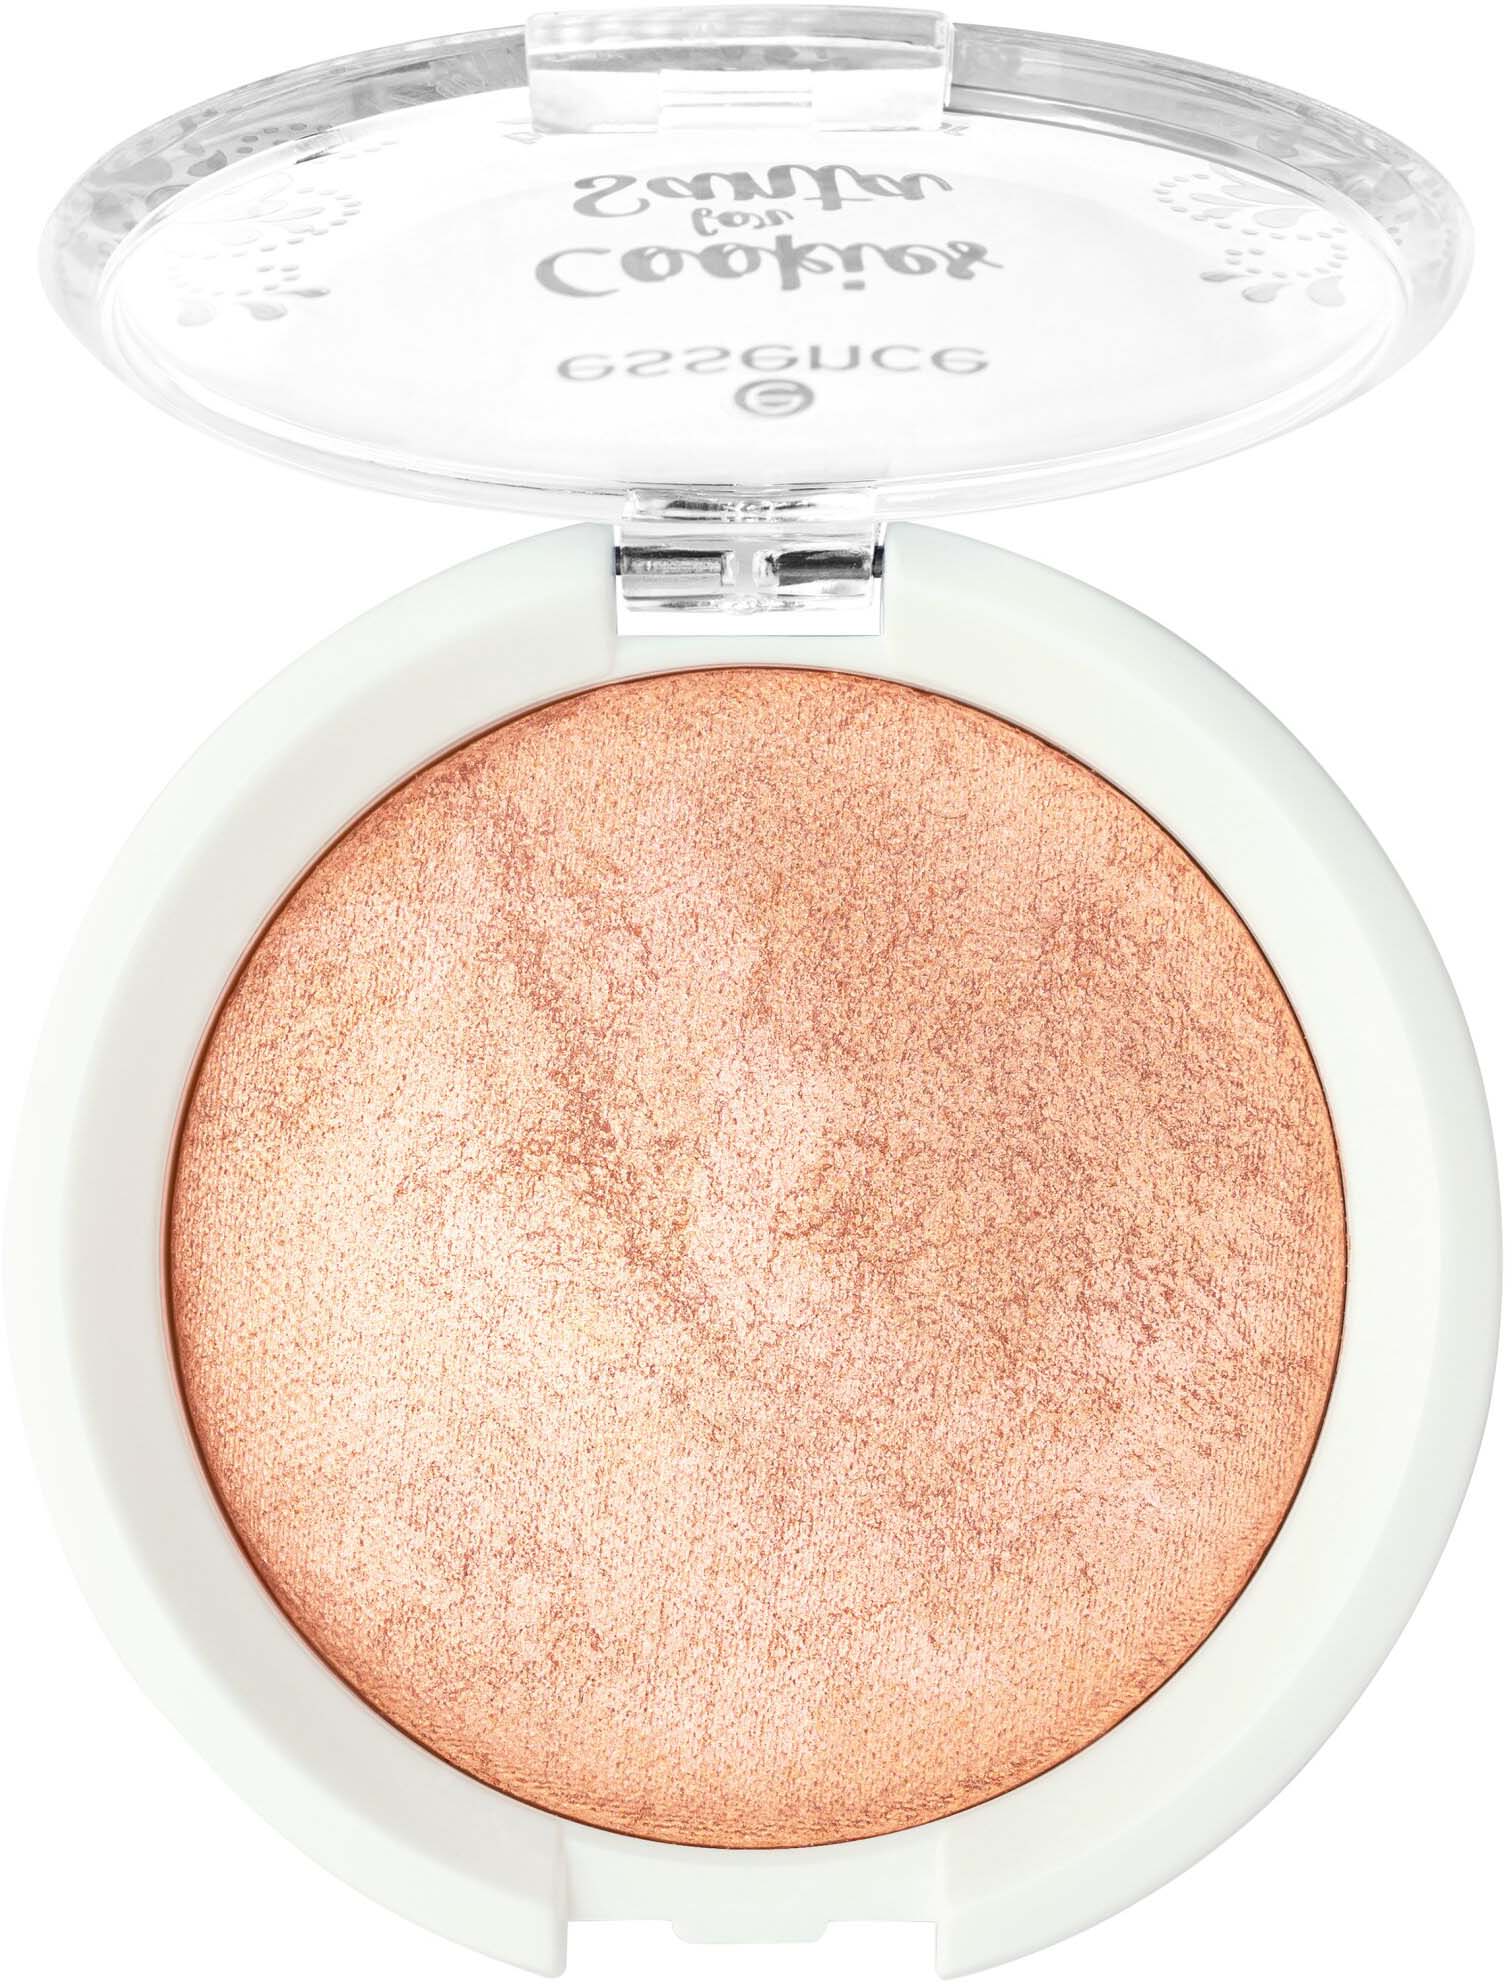 essence Cookies Baked Highlighter Santa for